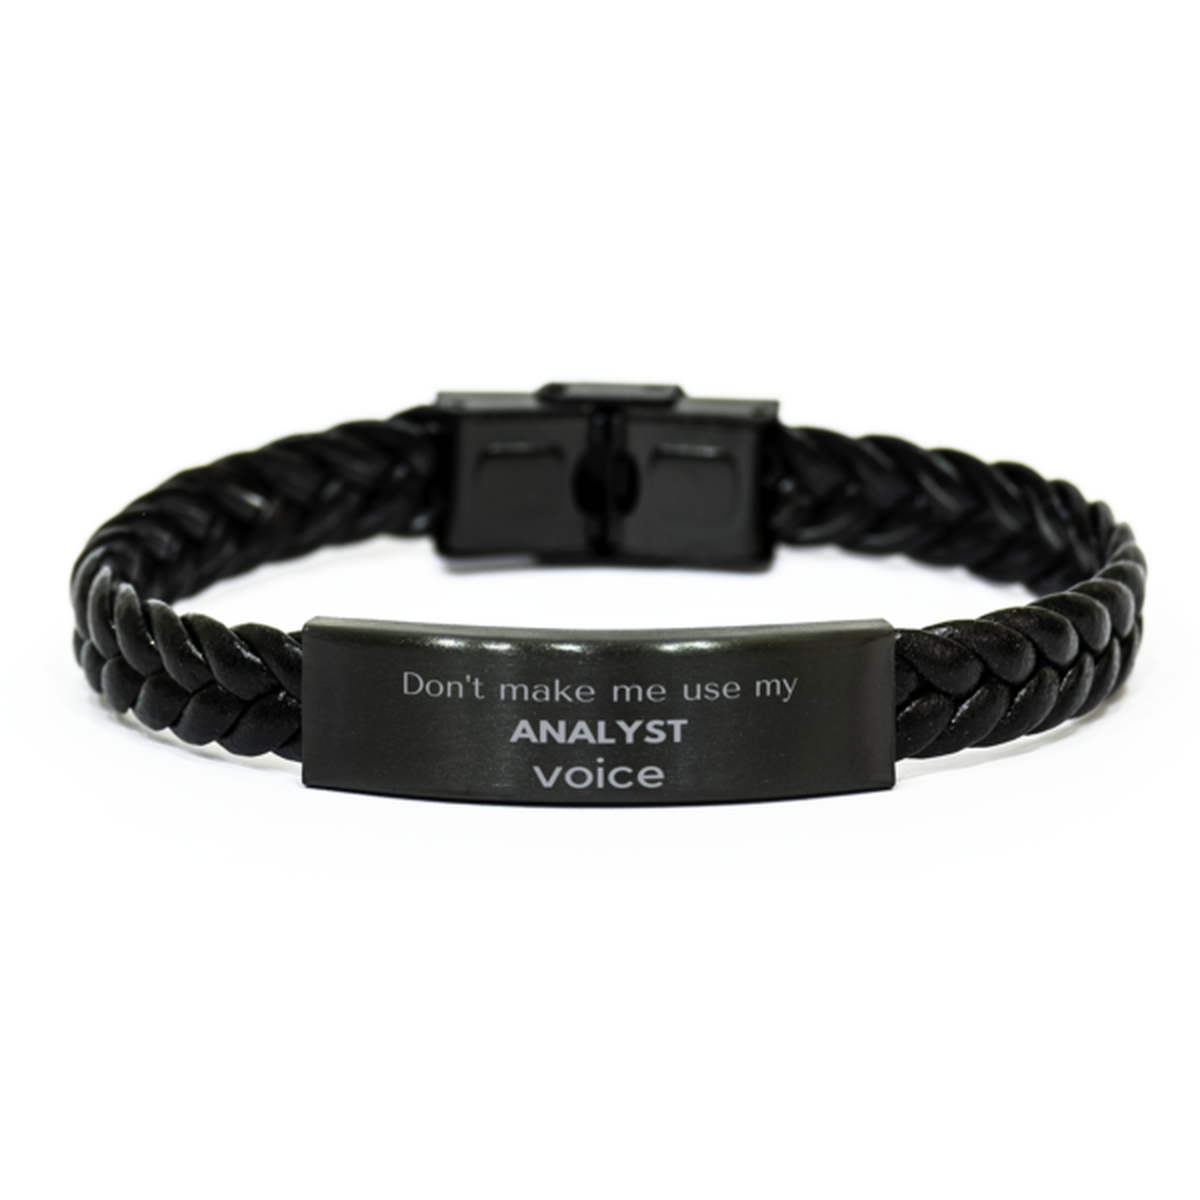 Don't make me use my Analyst voice, Sarcasm Analyst Gifts, Christmas Analyst Braided Leather Bracelet Birthday Unique Gifts For Analyst Coworkers, Men, Women, Colleague, Friends